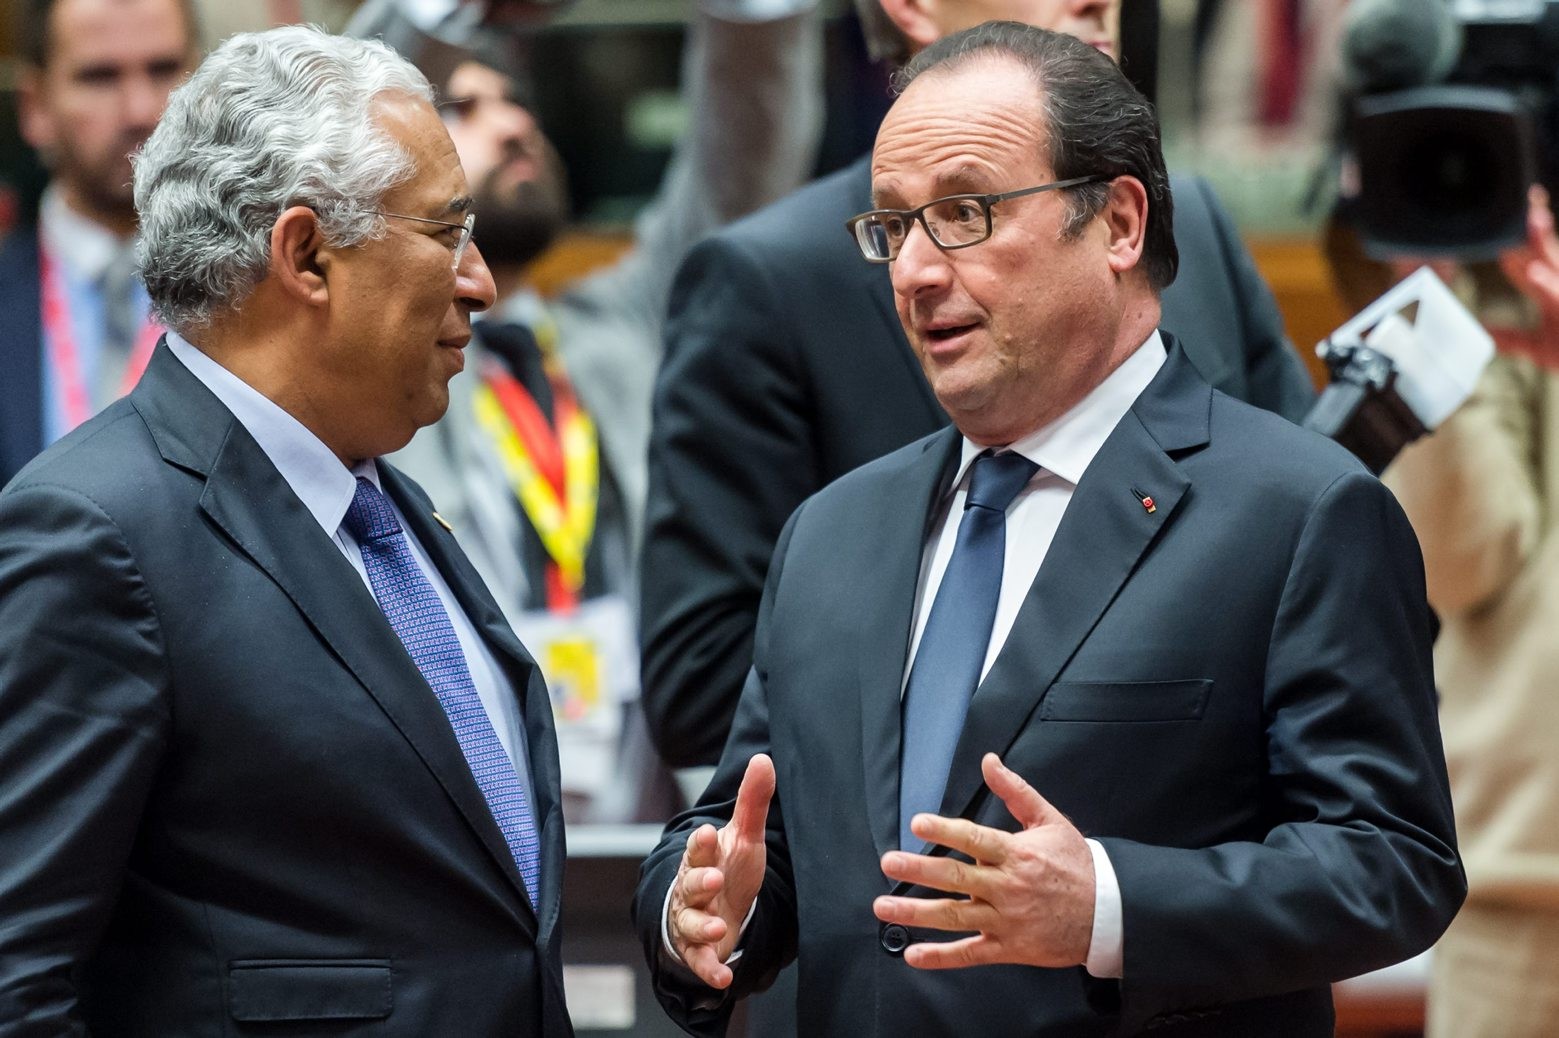 French President Francois Hollande, right, talks with Portugal's Prime Minister Antonio Costa during an EU summit in Brussels on Thursday, Dec. 17, 2015. European Union heads of state meet Thursday to discuss, among other issues, the current migration crisis and terrorism. (AP Photo/Geert Vanden Wijngaert) Europe EU Summit